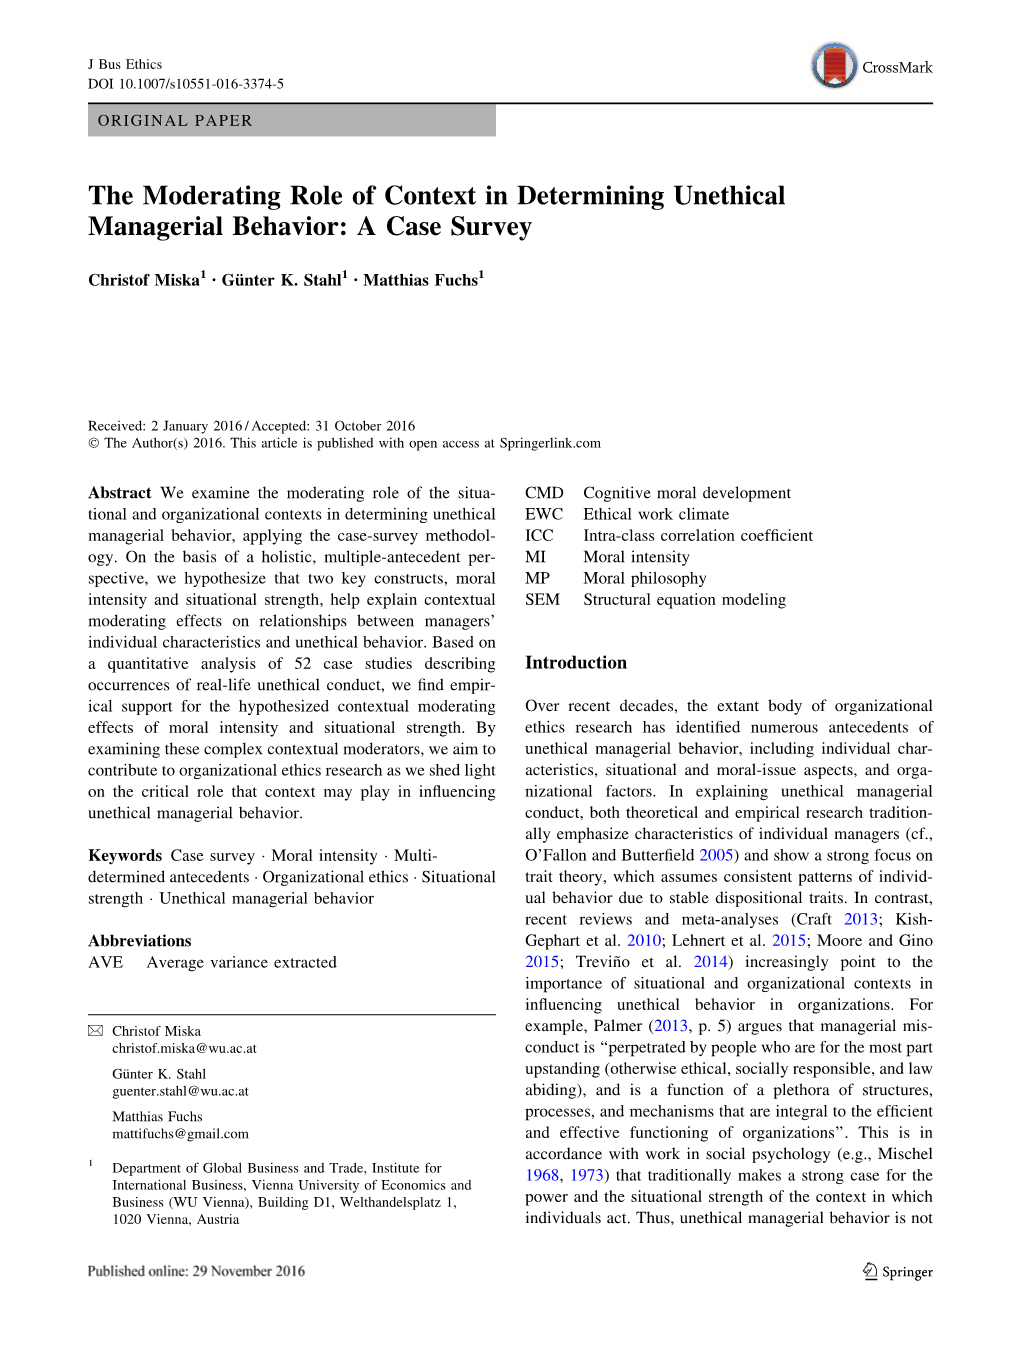 The Moderating Role of Context in Determining Unethical Managerial Behavior: a Case Survey